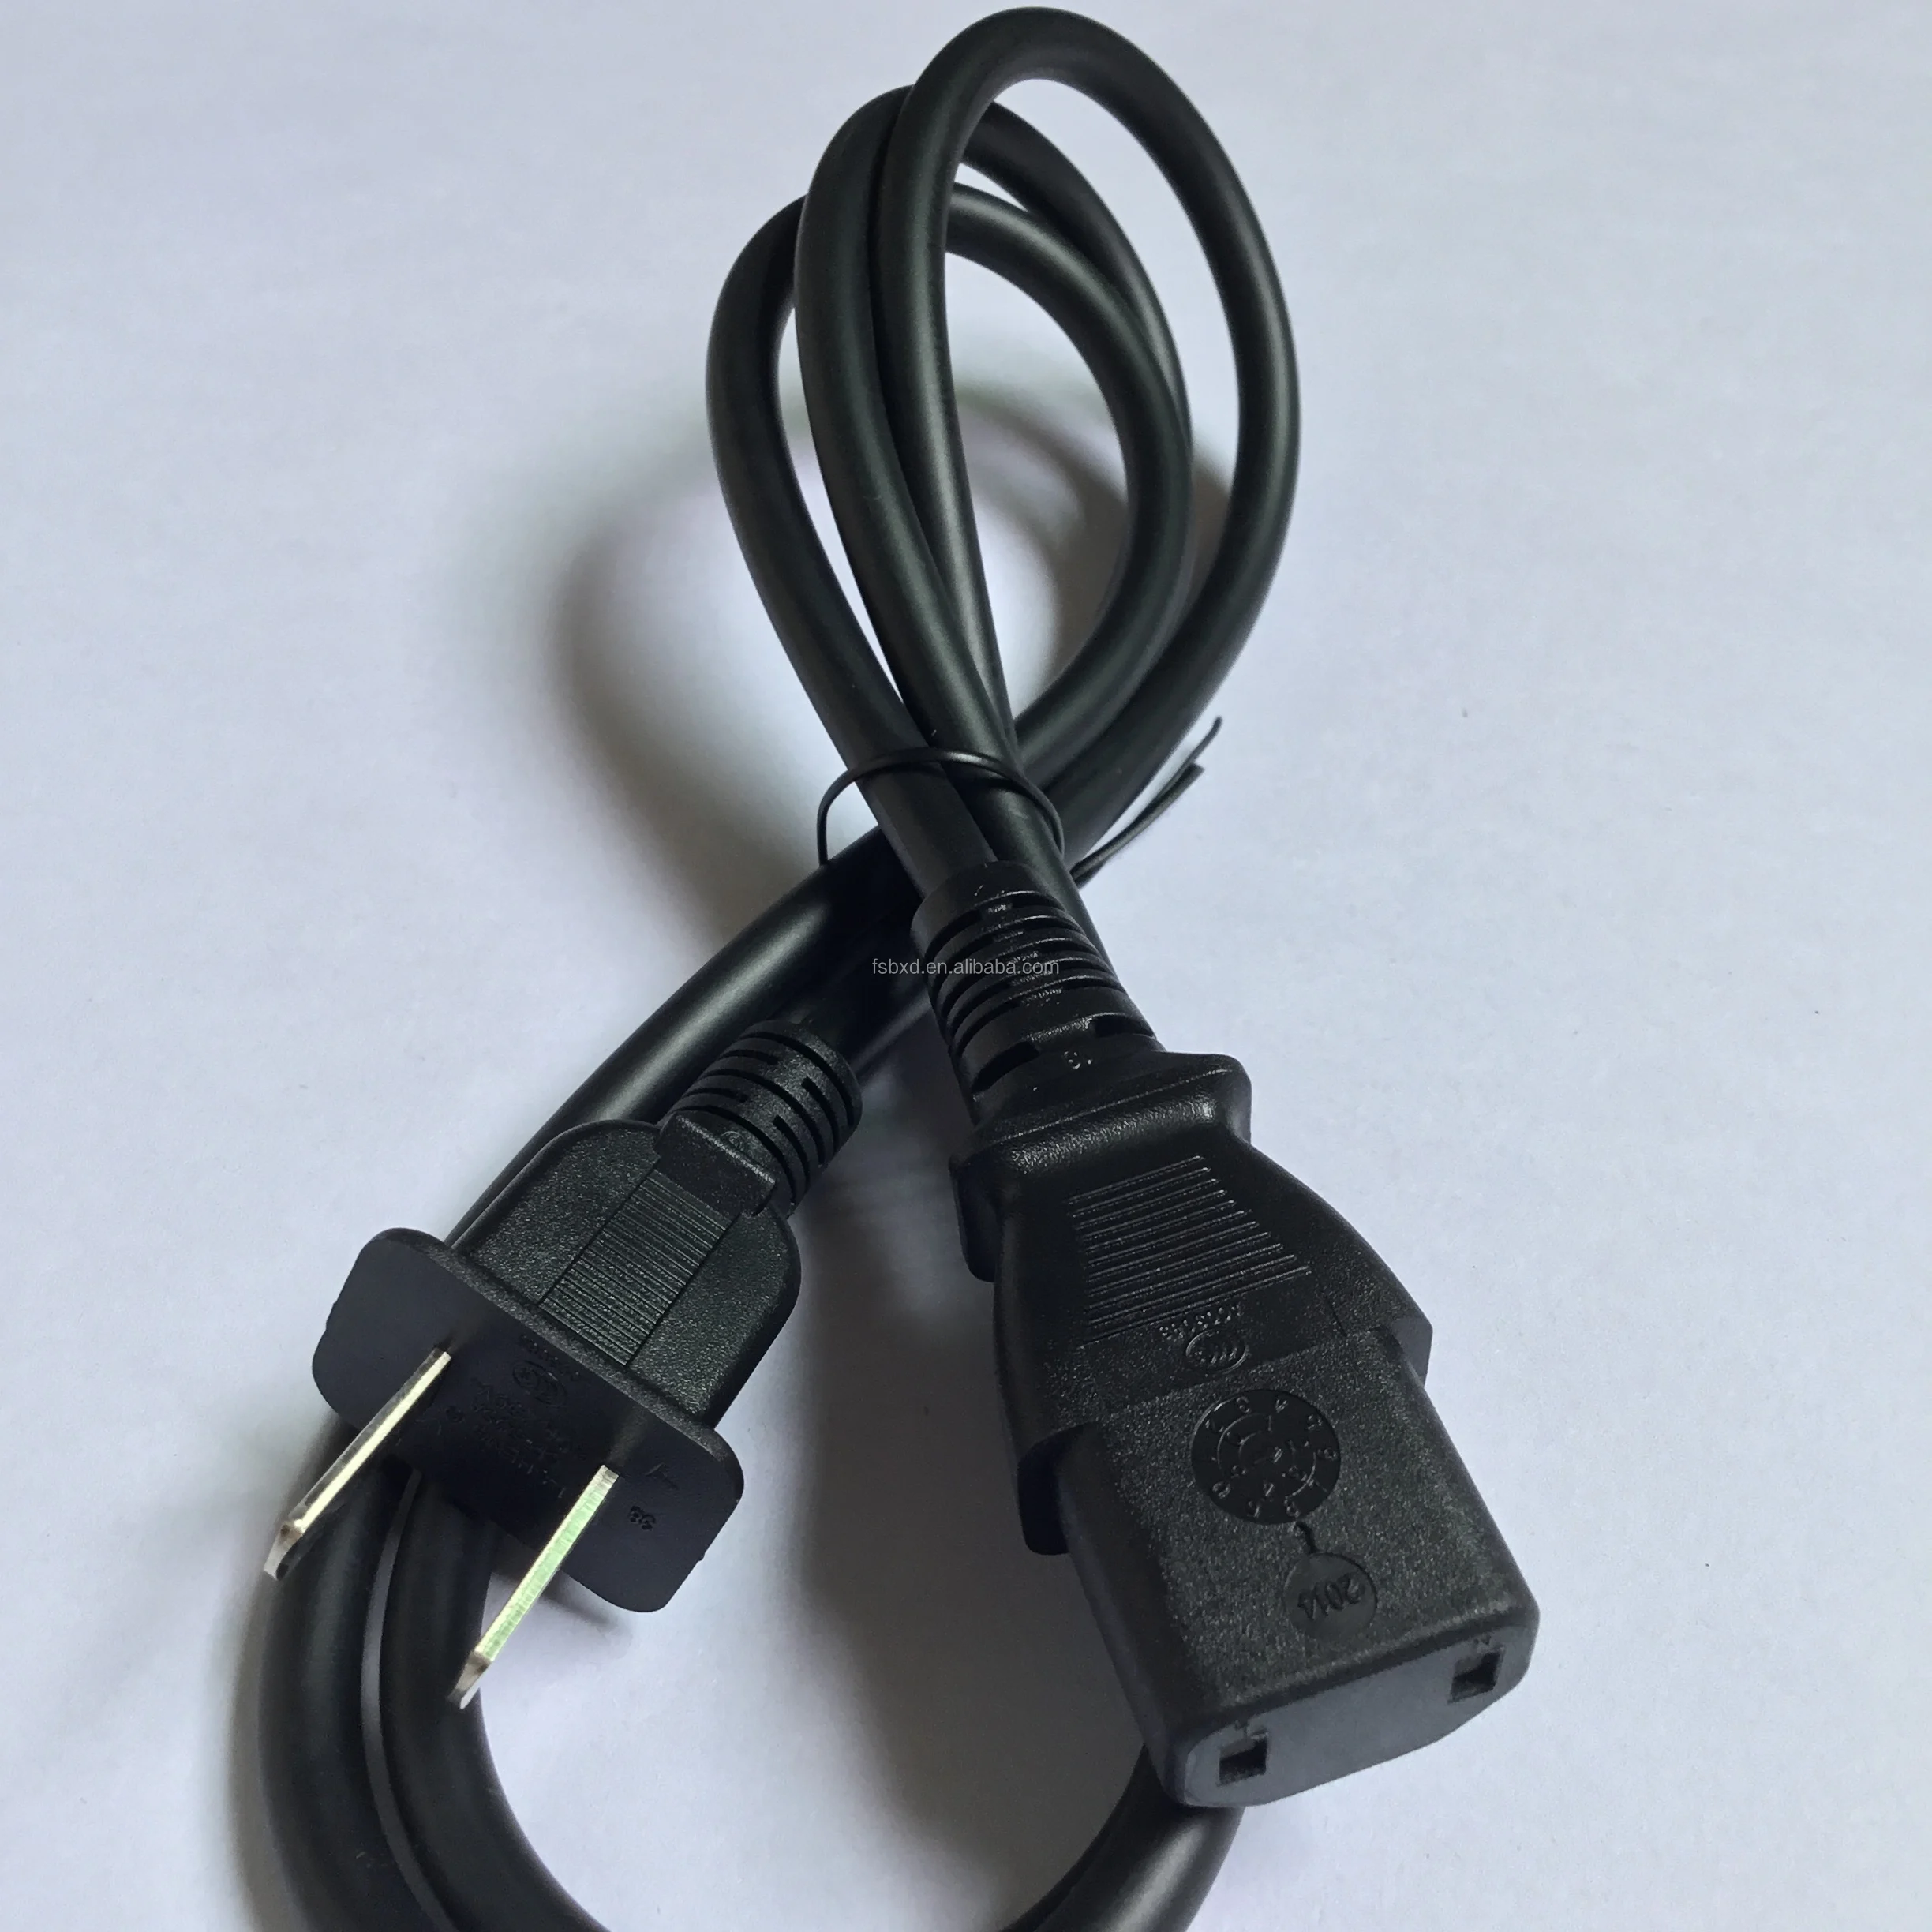 ps4 and ps4 pro power cord